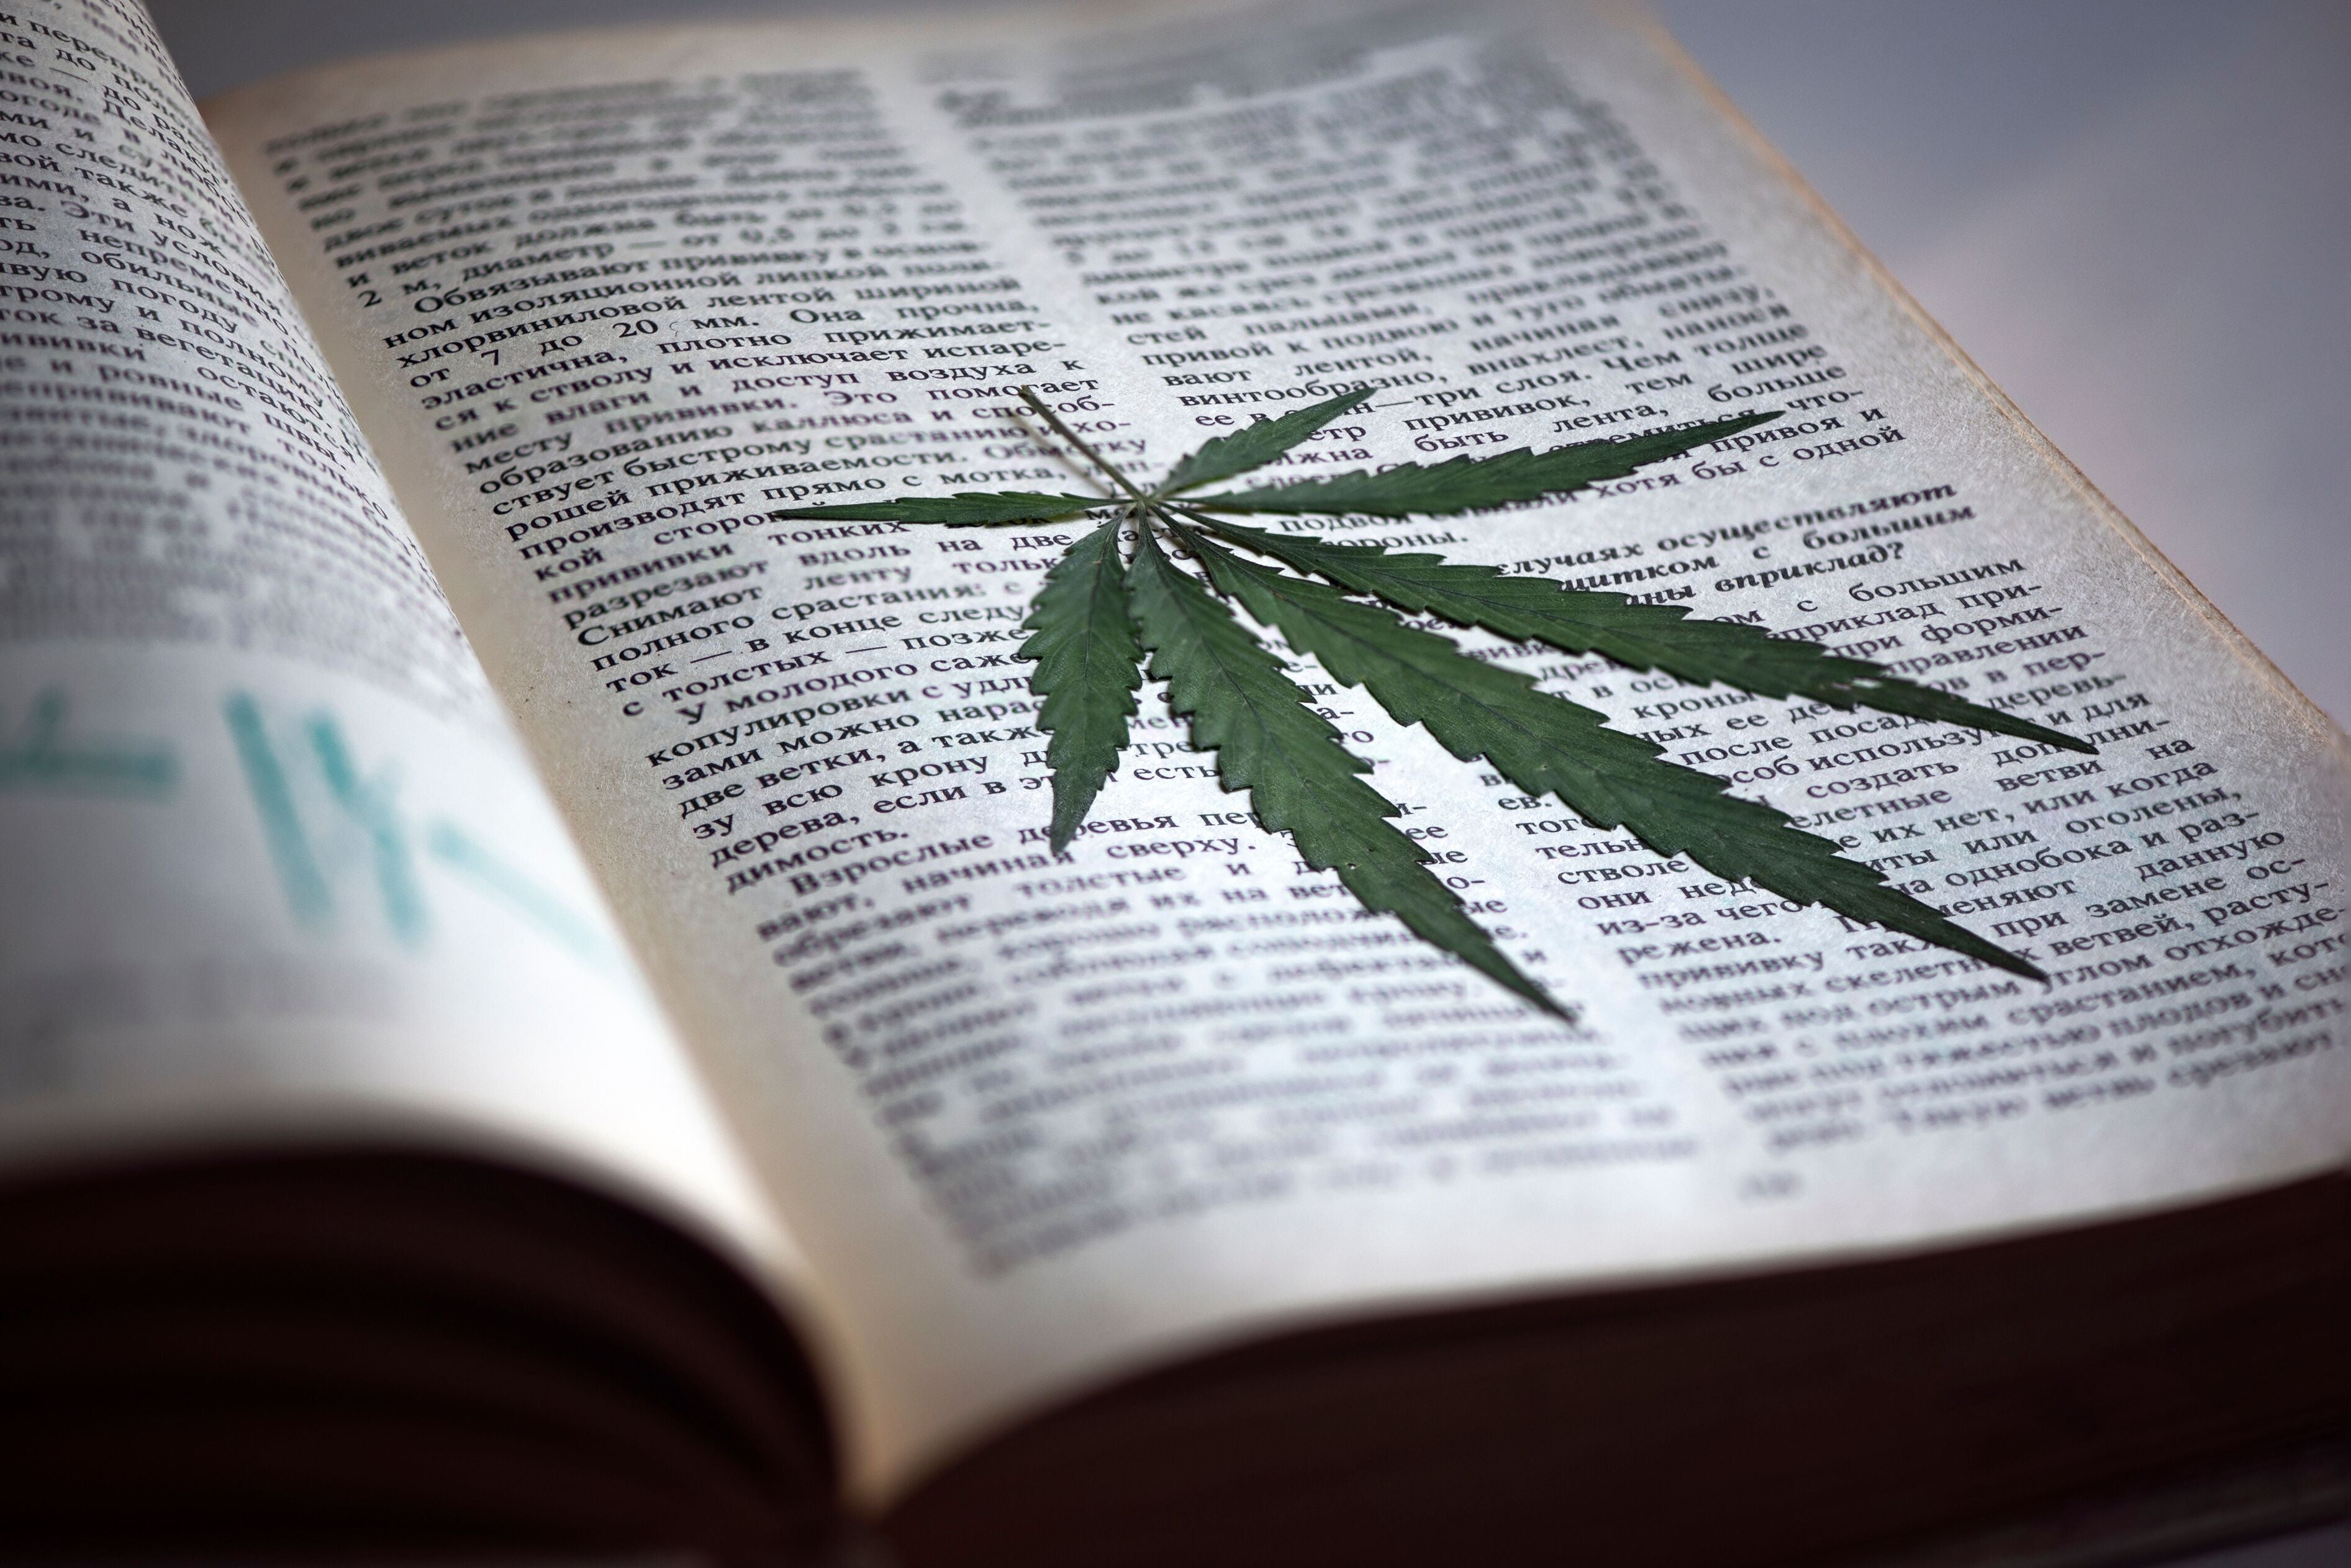 Hemp Lexicon launched to help standardize industry terminology